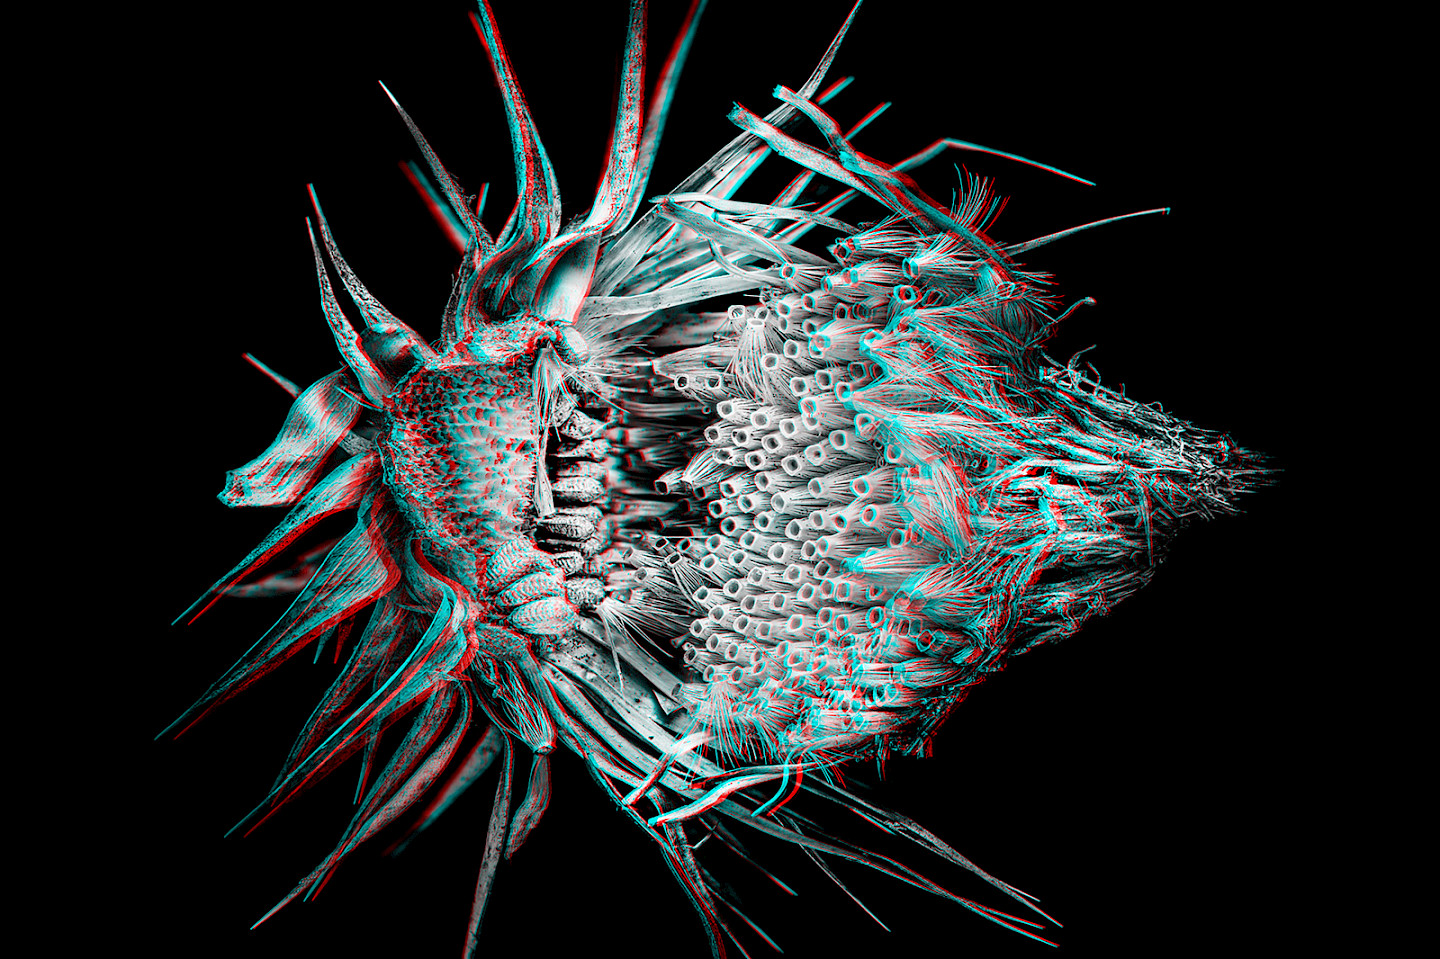 Cracked thistle, stereoscopic photograph